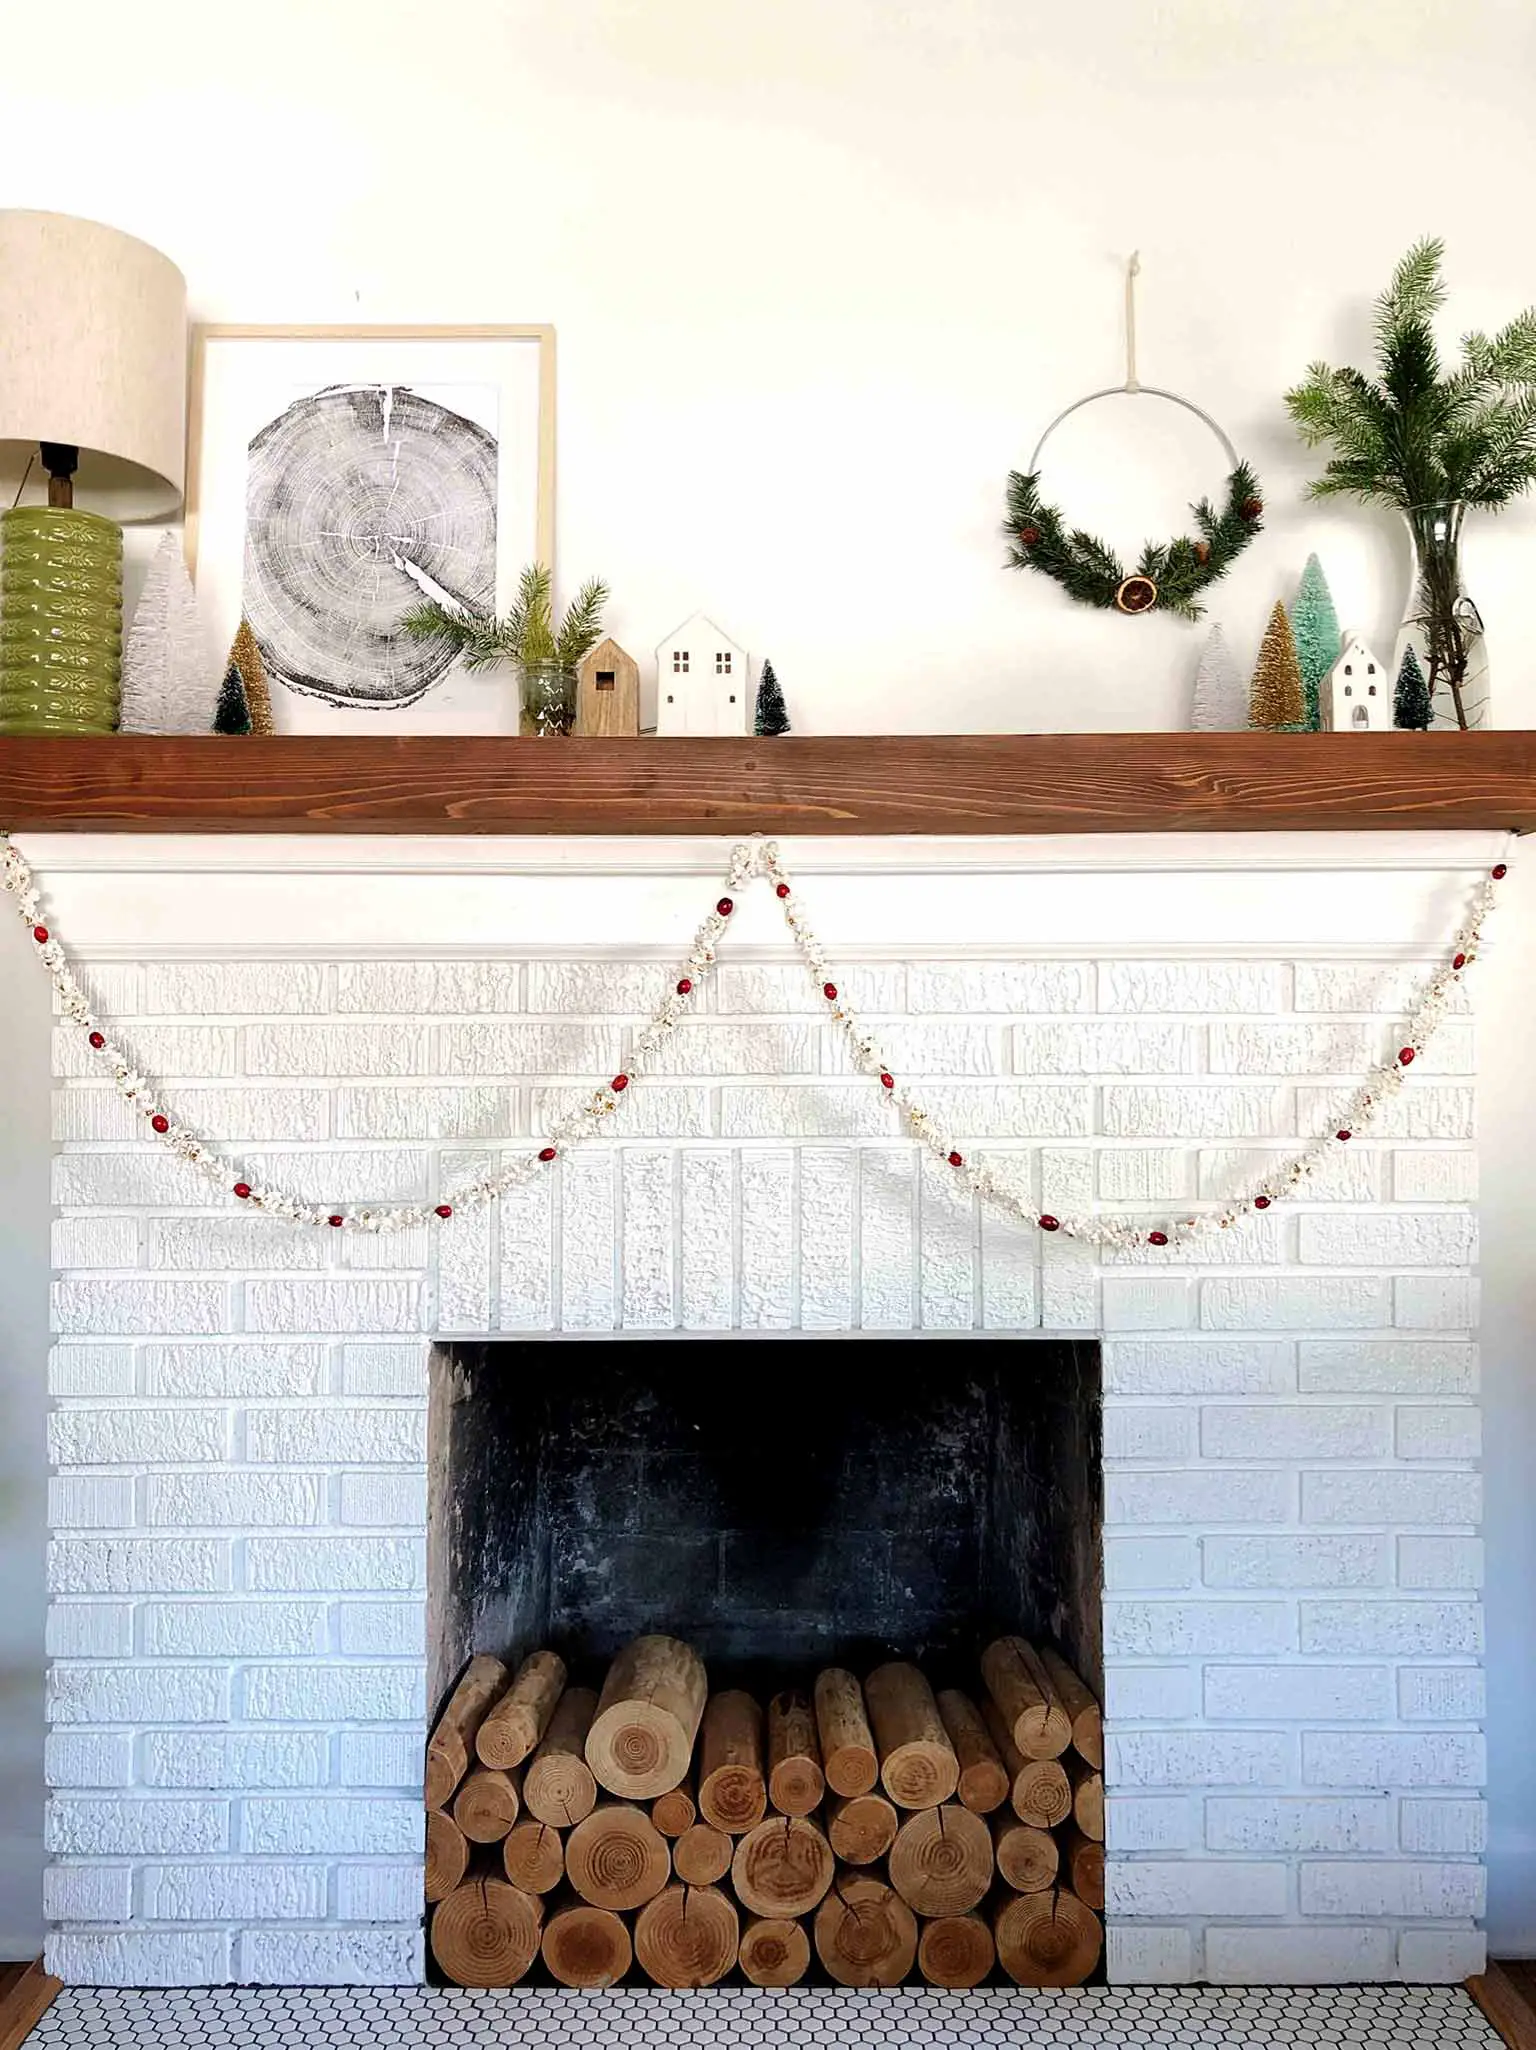 popcorn and cranberry garland on mantel